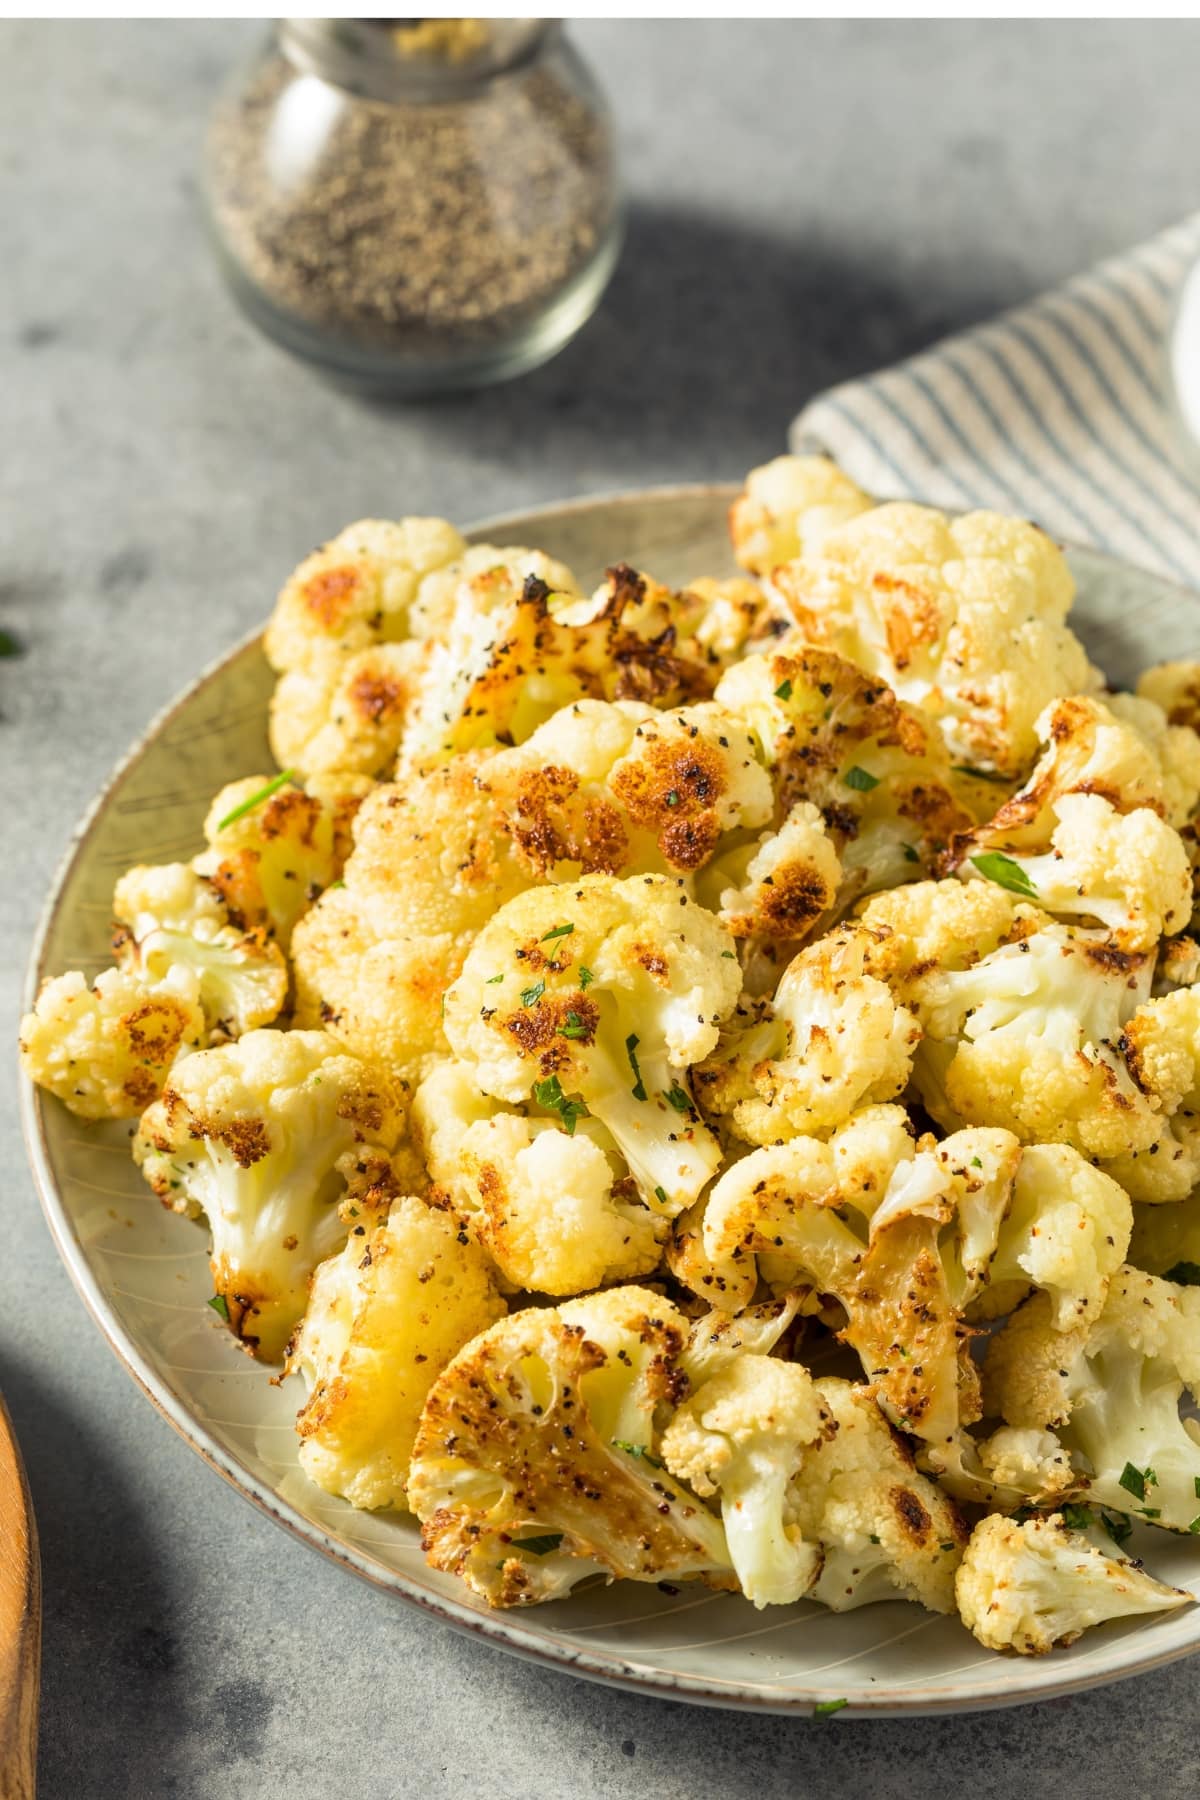 Roasted cauliflower in a plate.